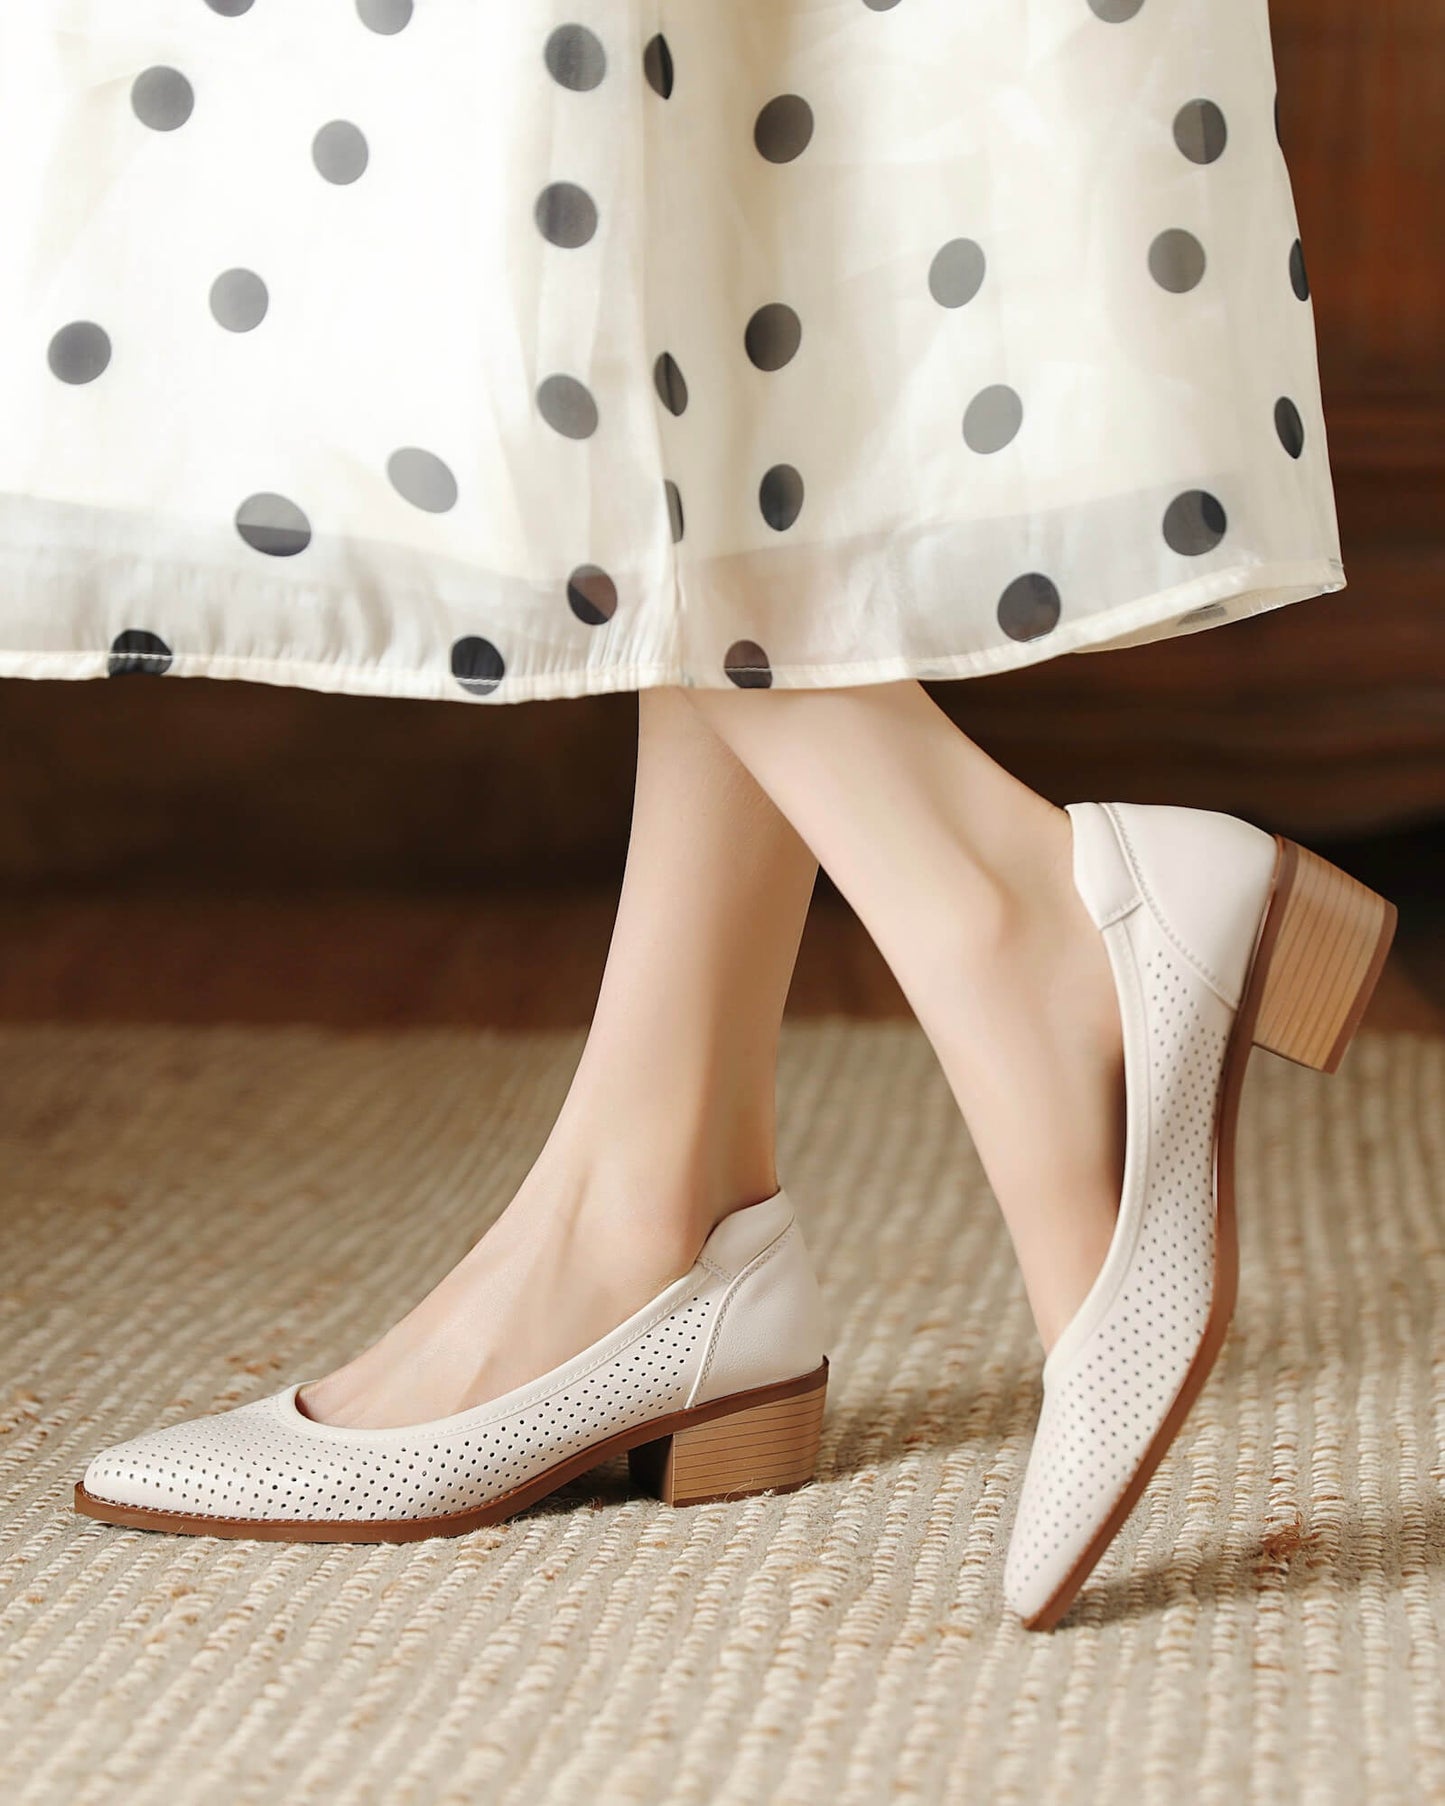 Kina - Perforated Leather Pumps